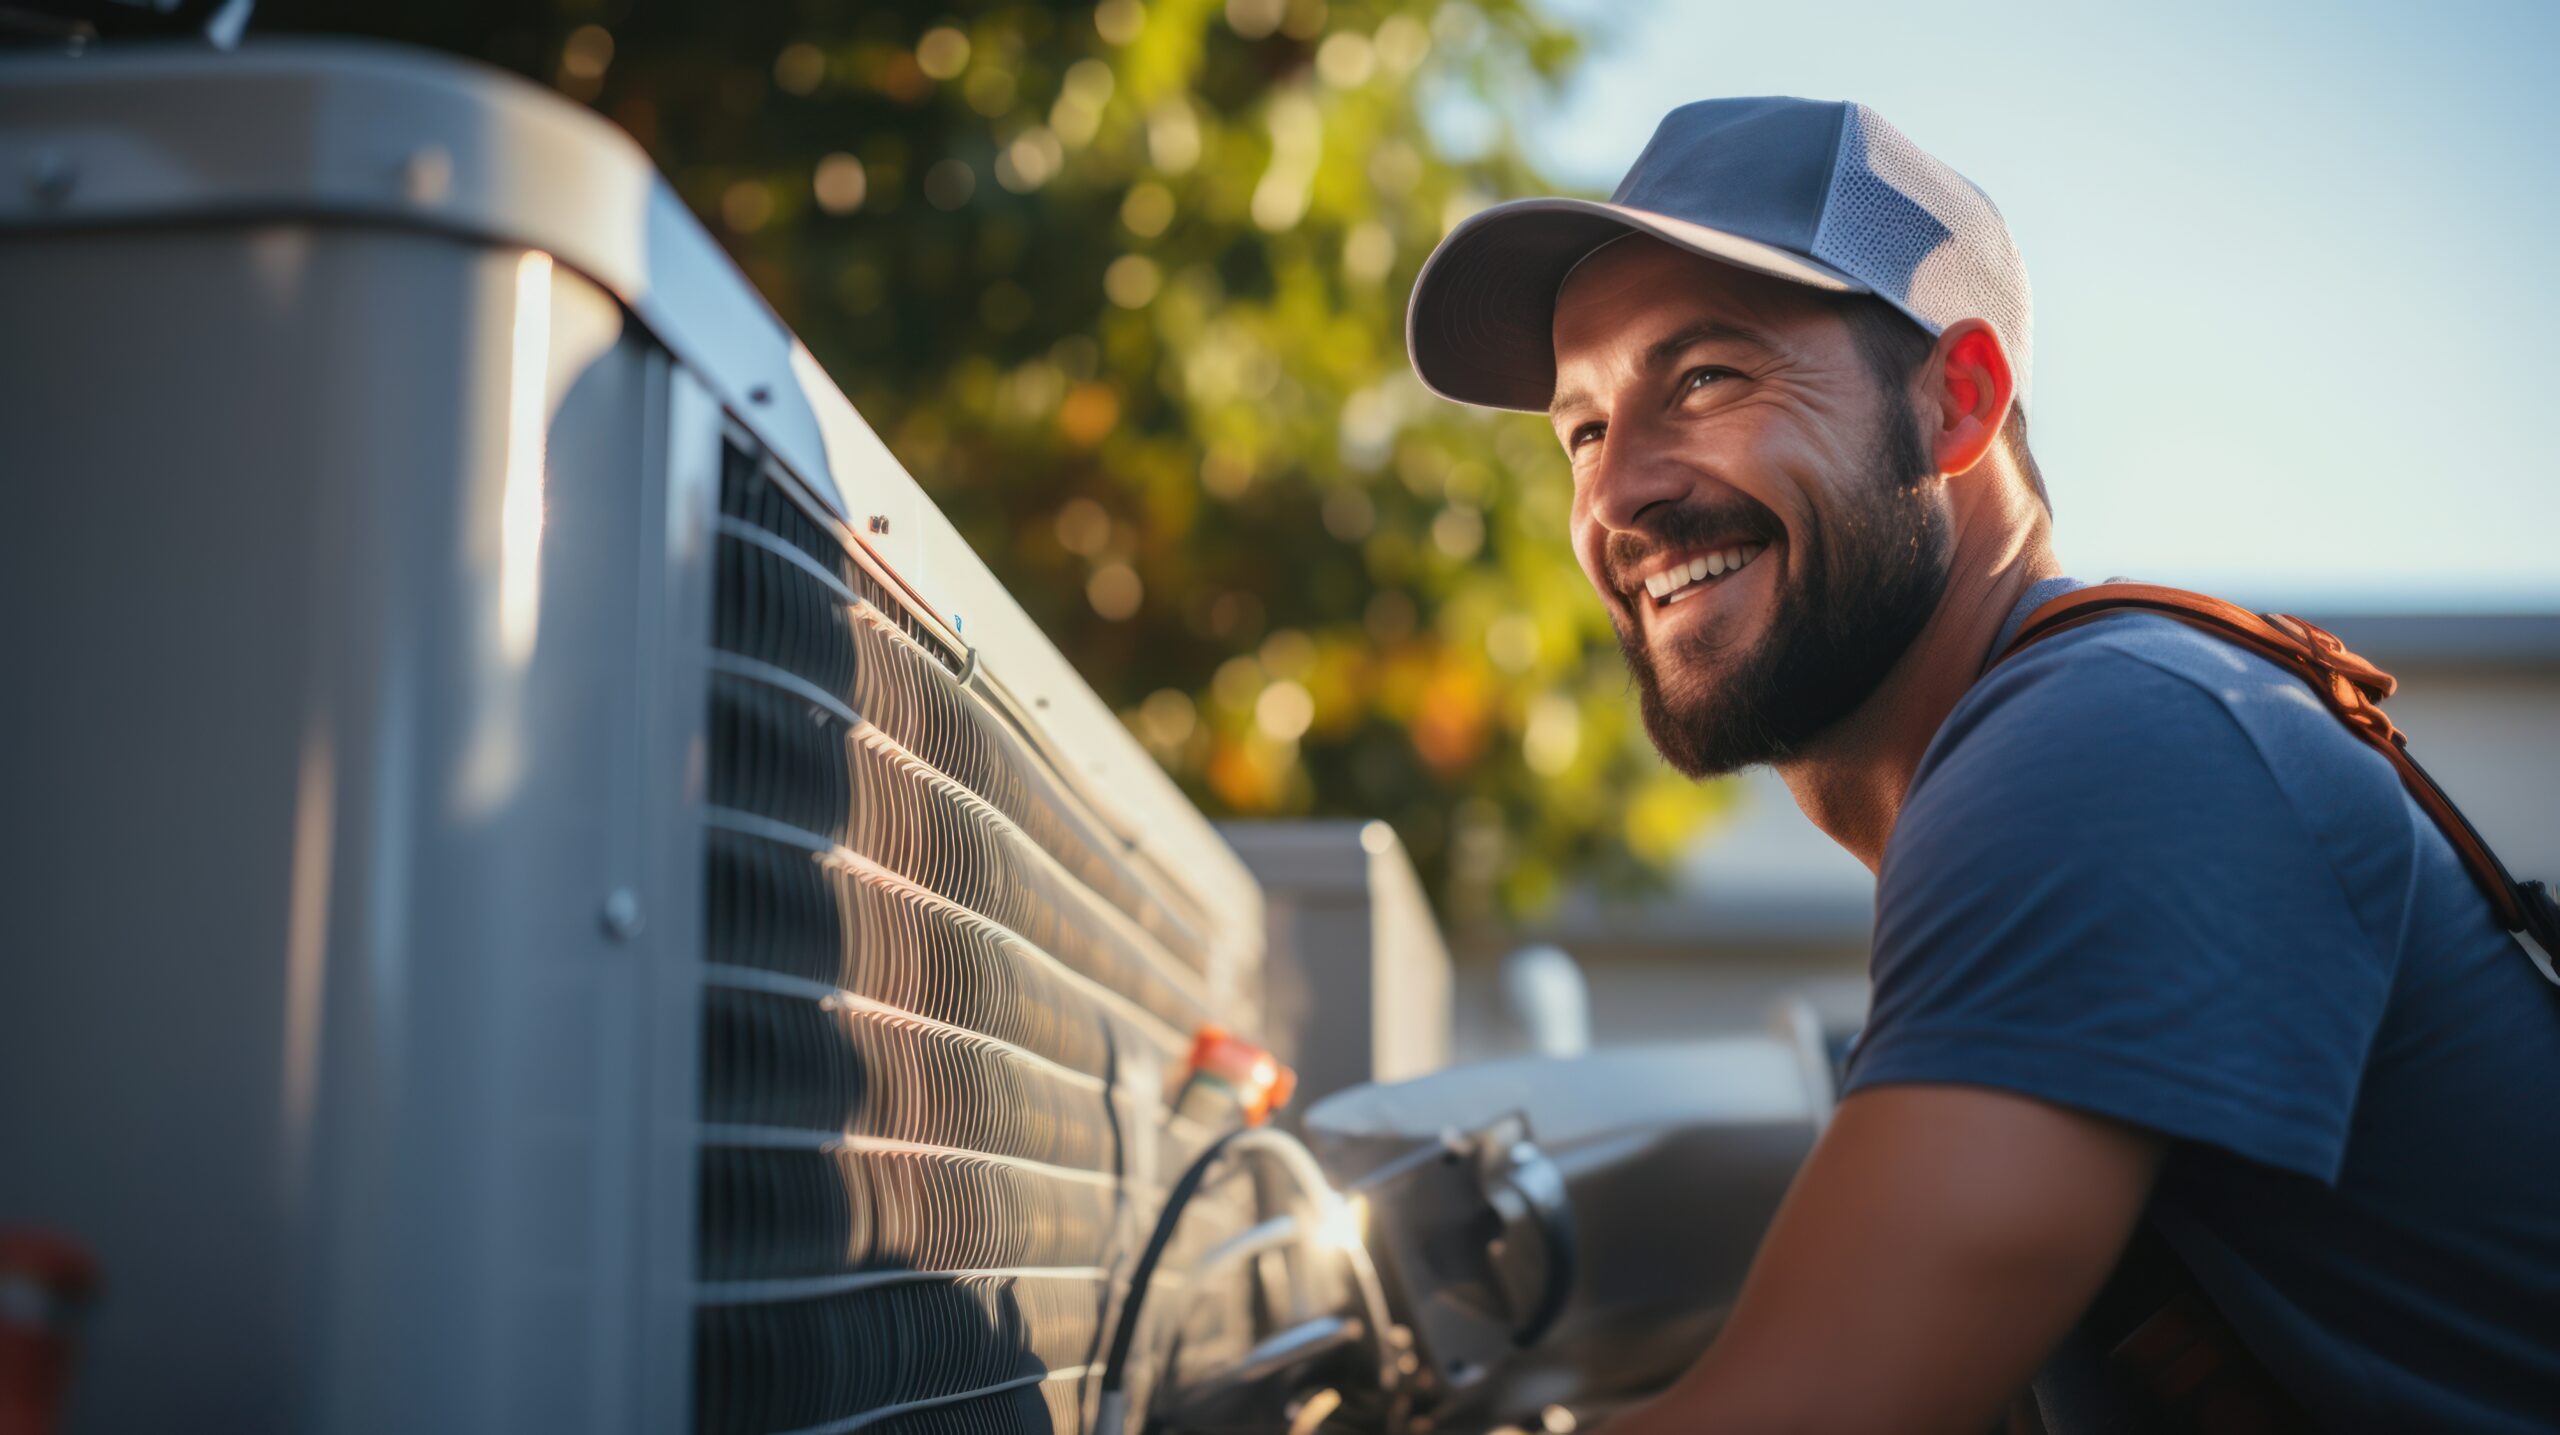 Schedule an air conditioner tune up with Air Comfort Solutions in your Tulsa home today!